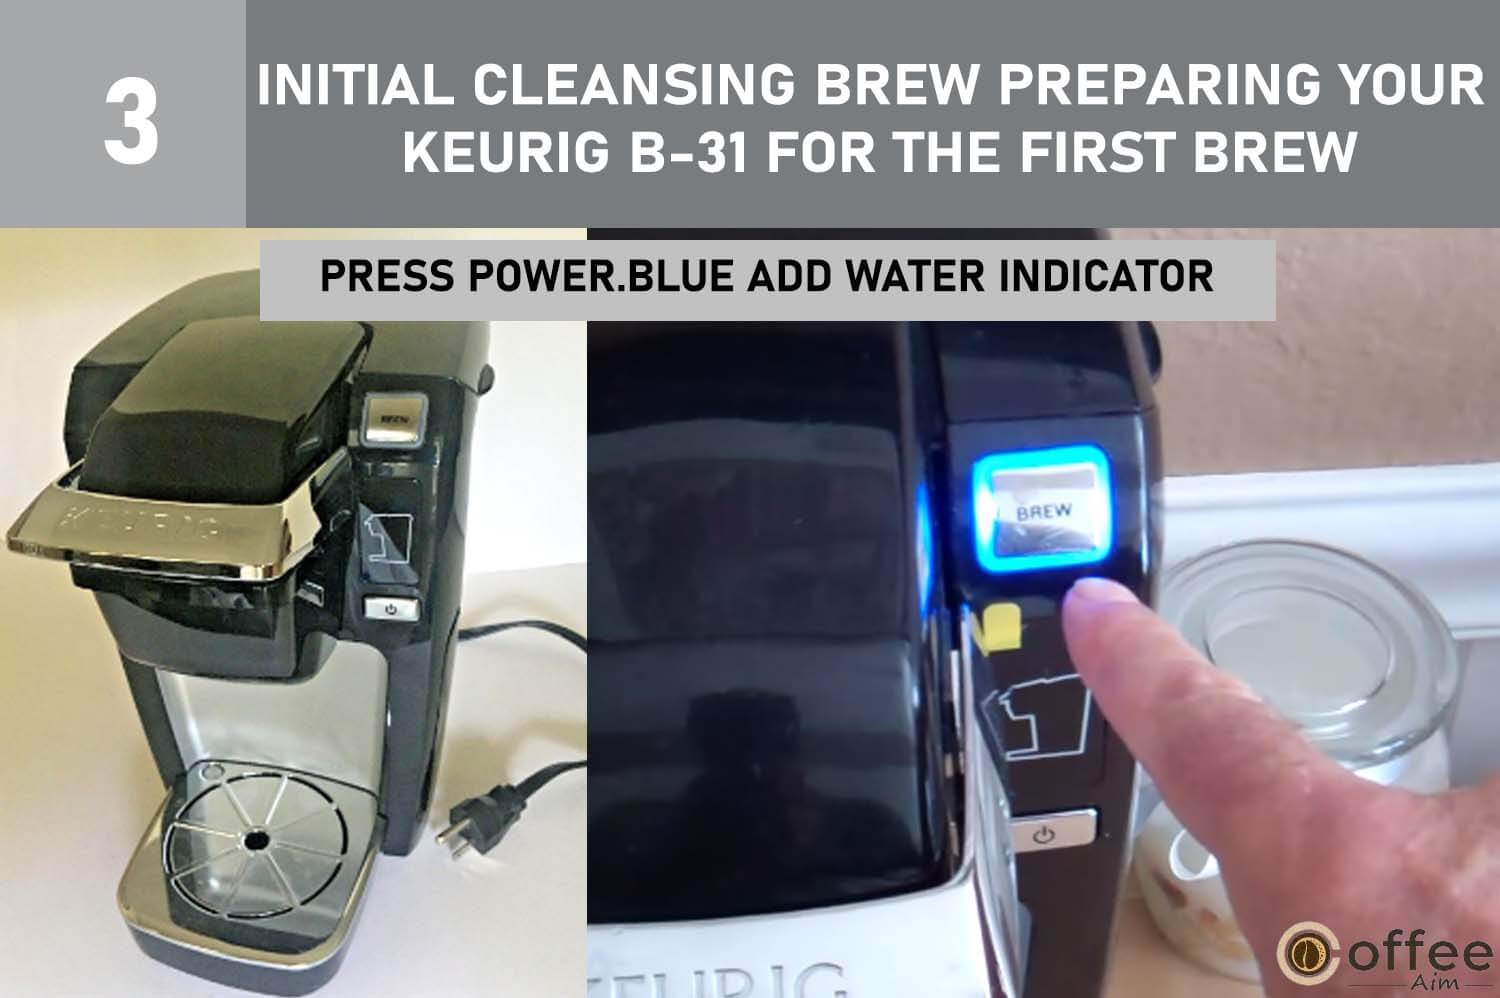 In the process of conducting the initial cleansing brew and preparing your Keurig B-31 for its inaugural cup, it is imperative to press the distinguished Power Button while also observing the conspicuous blue Add Water Indicator.